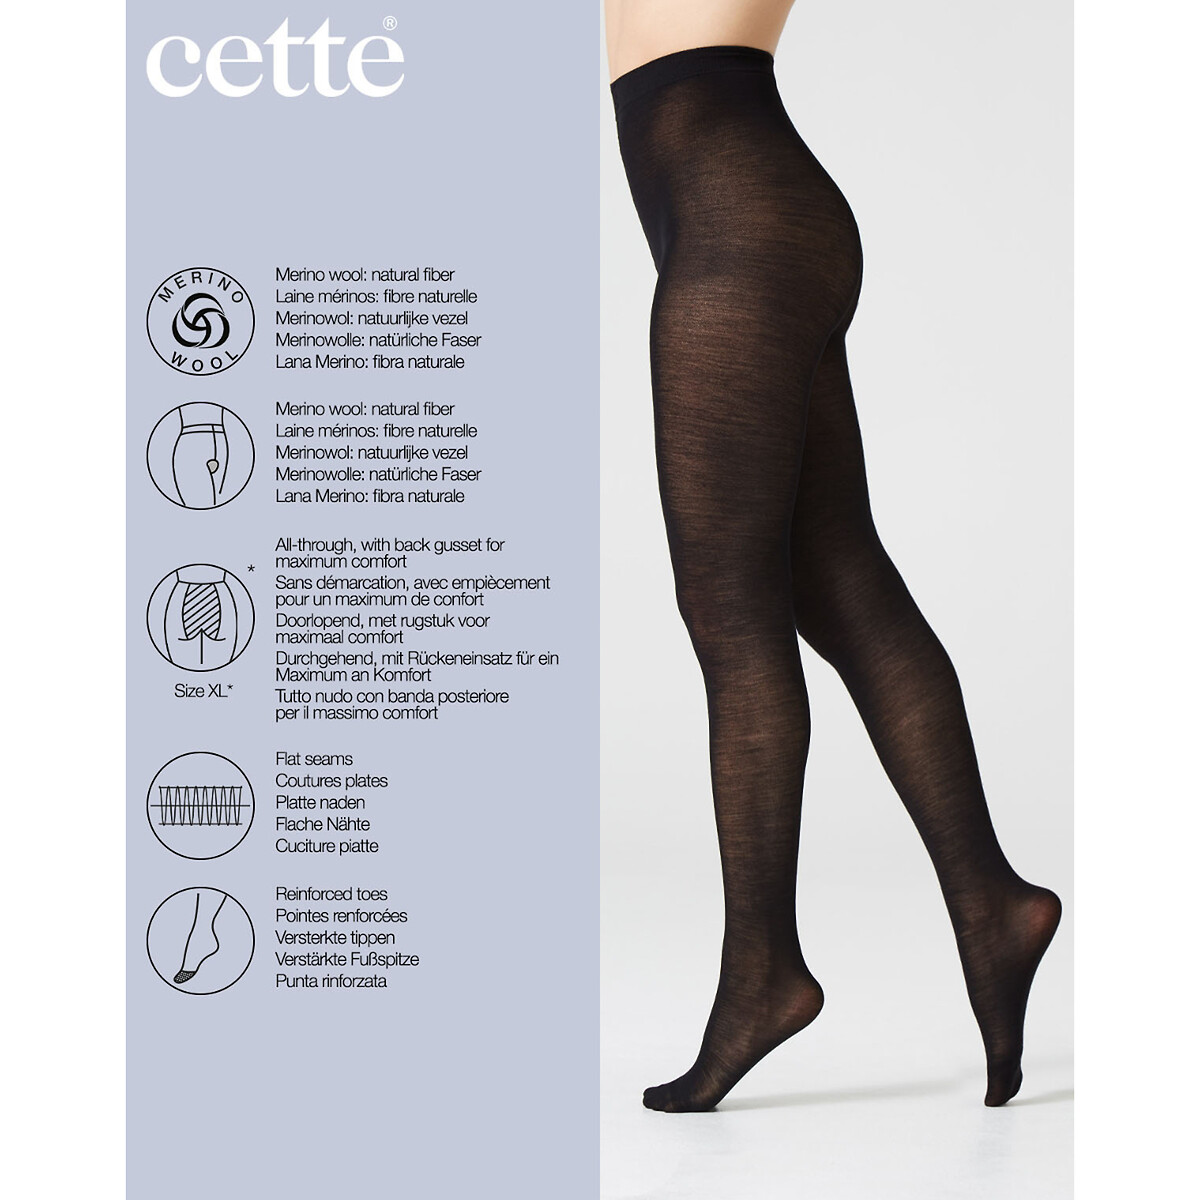 Falke Soft Merino Wool and Cotton Mix Tights In Stock At UK Tights